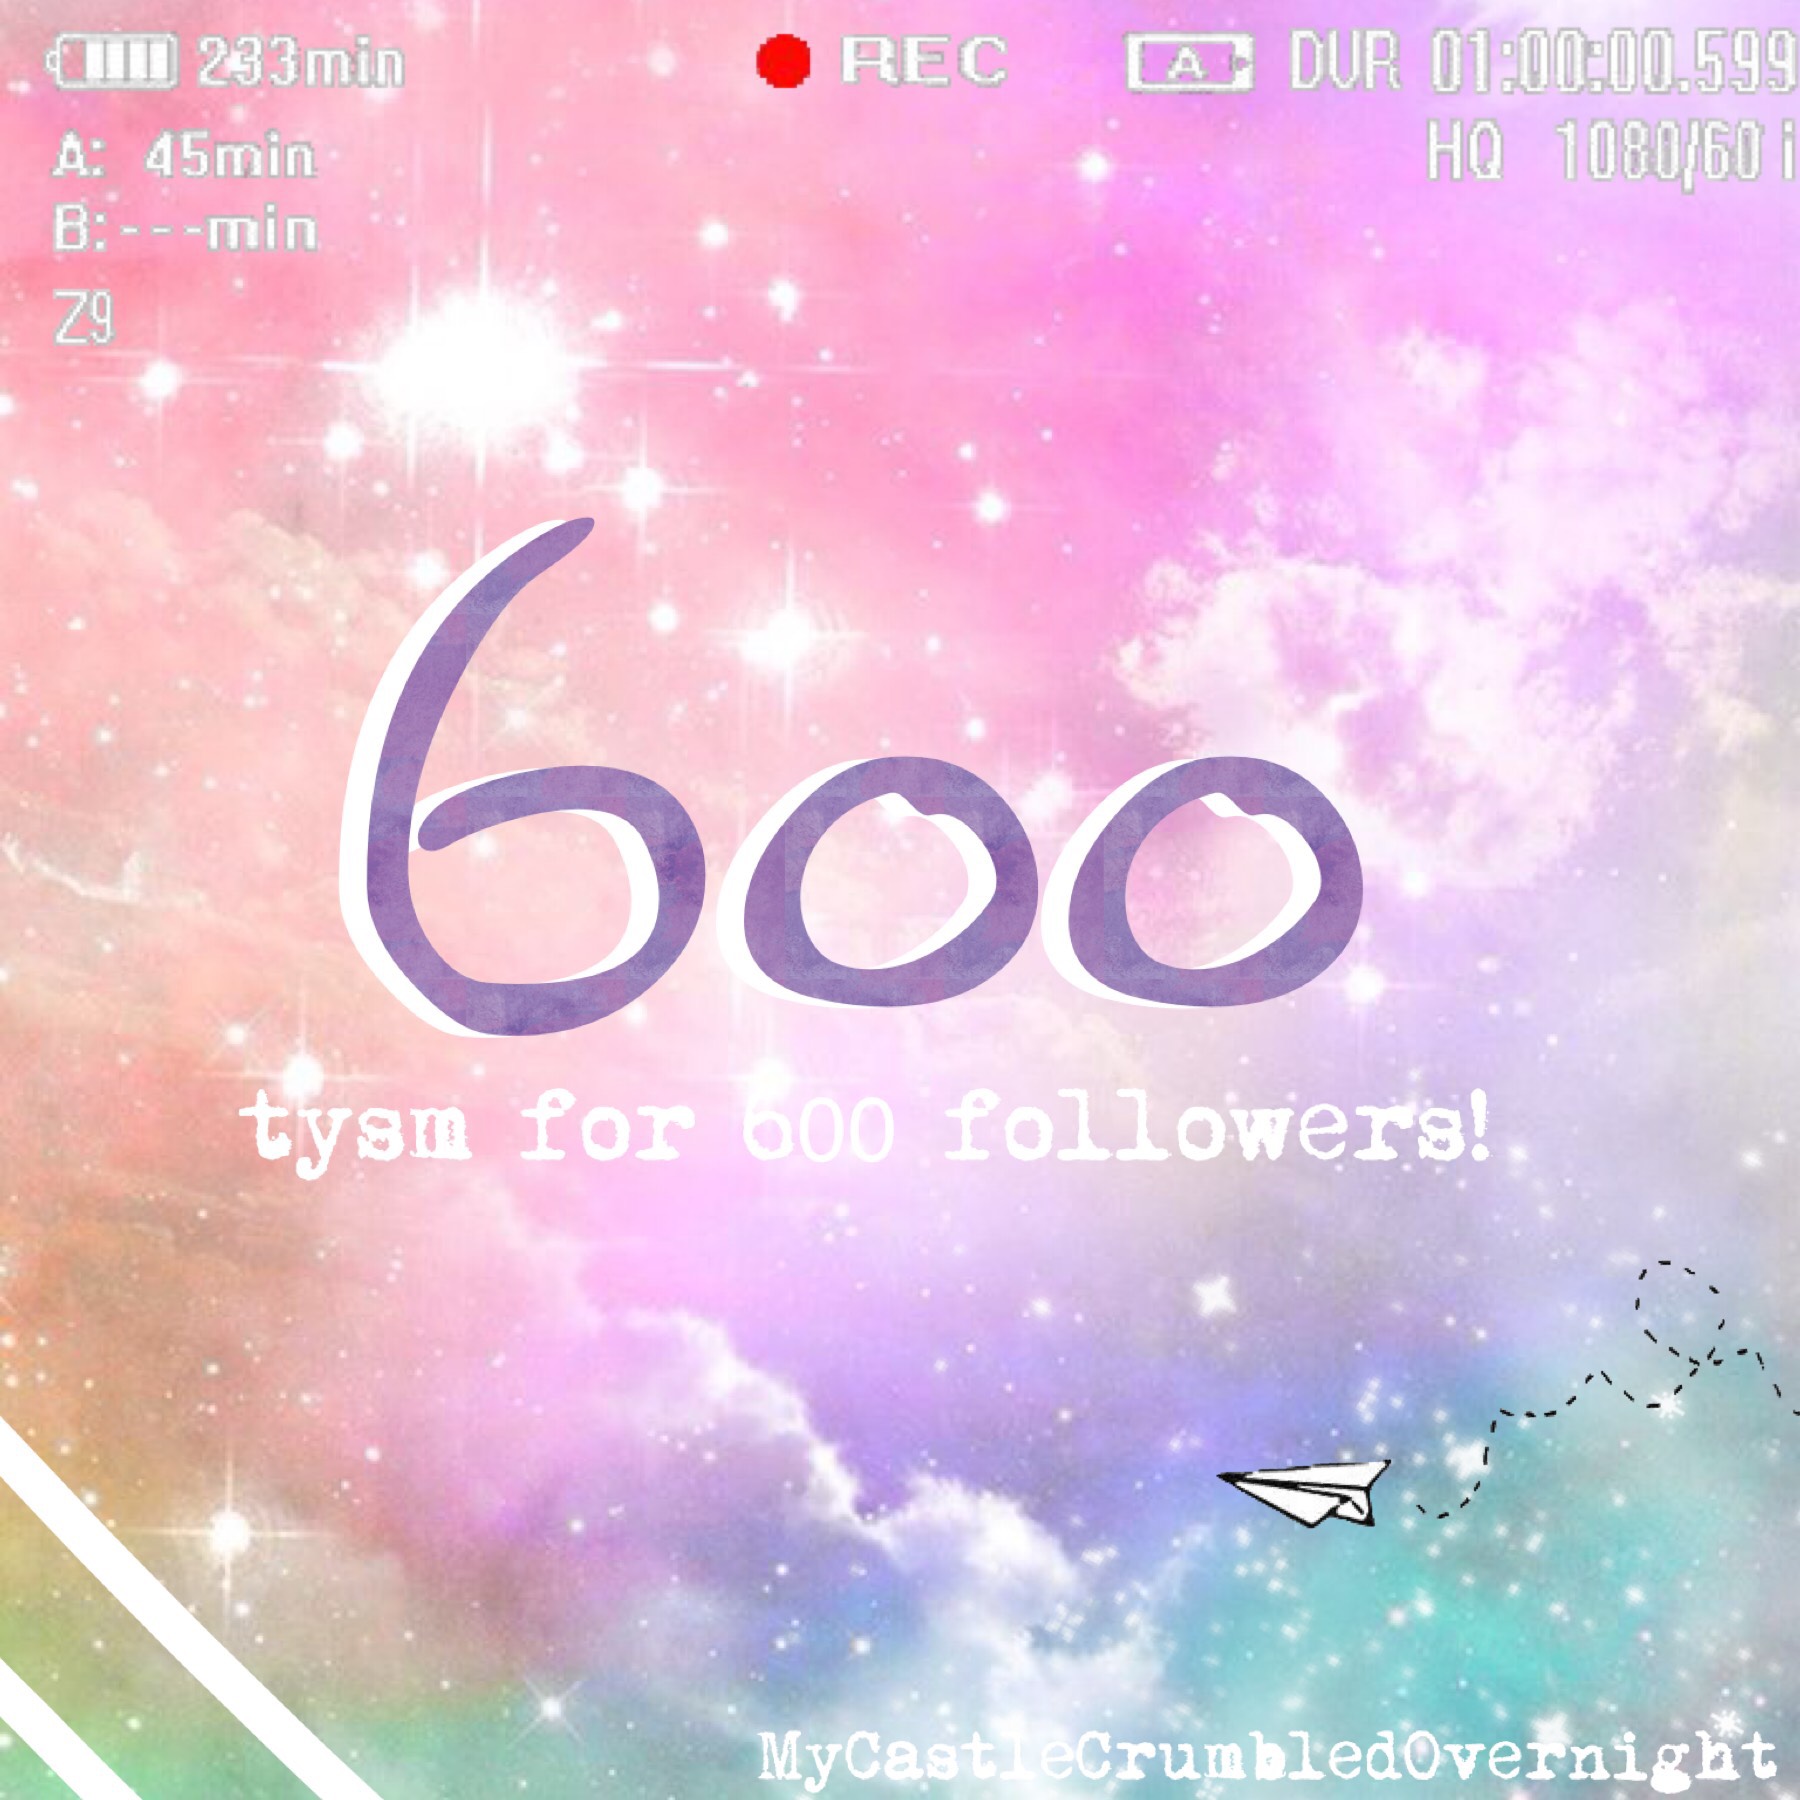 Yayyyyy! 600 followers! I owe it all to you guys! 😘 tap ✰
let me know in the comments what you want to do to celebrate (ex: guess me, giveaway, etc.)